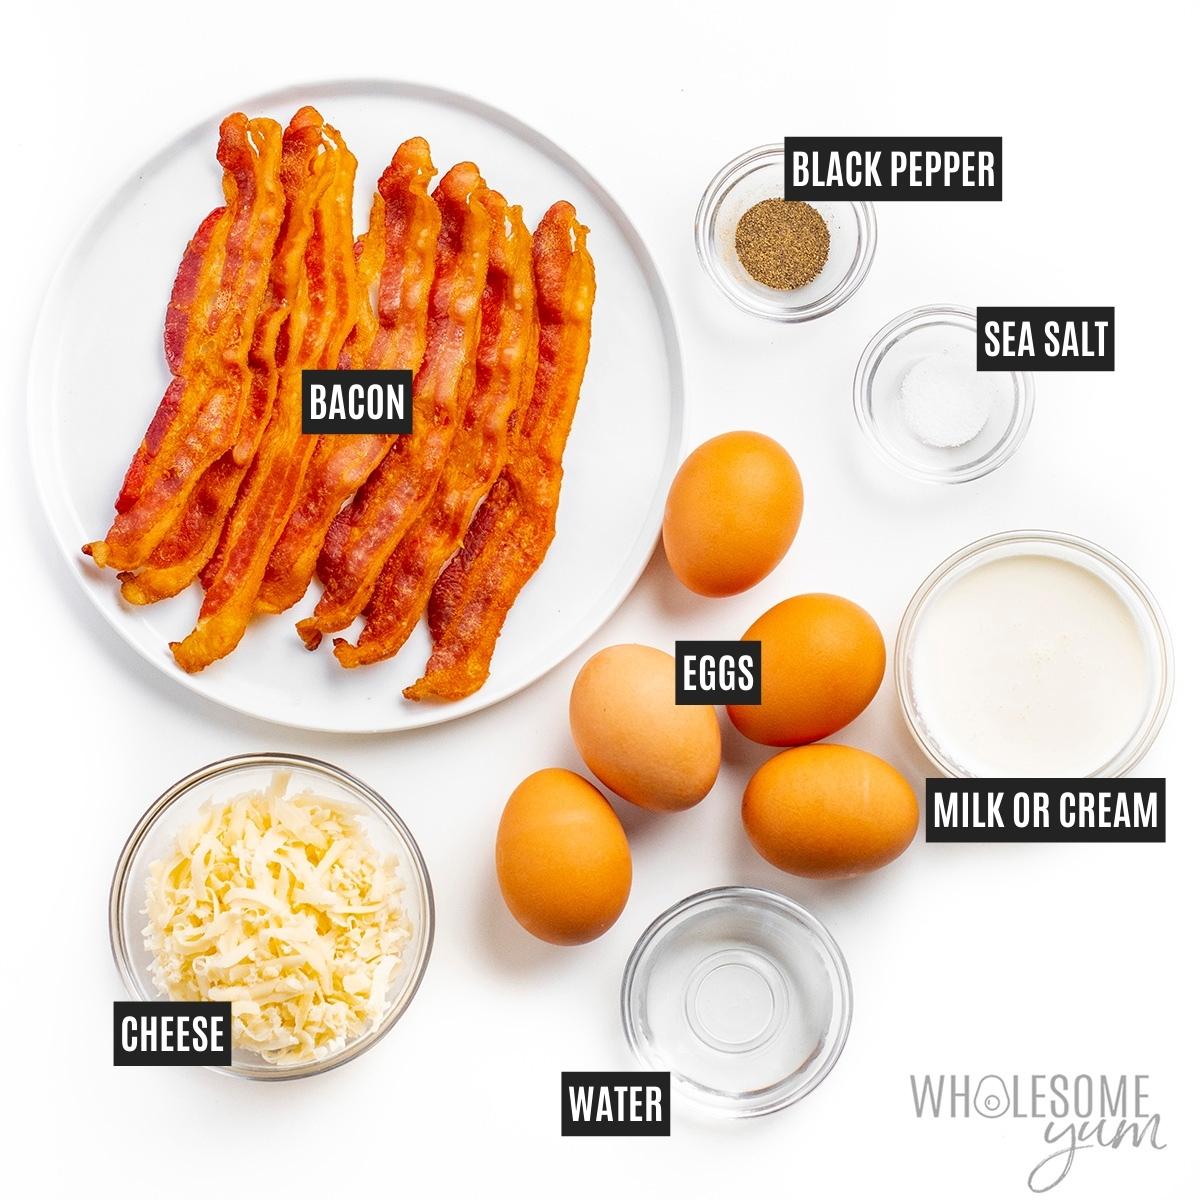 Egg bite ingredients including eggs, cheese, and bacon. 